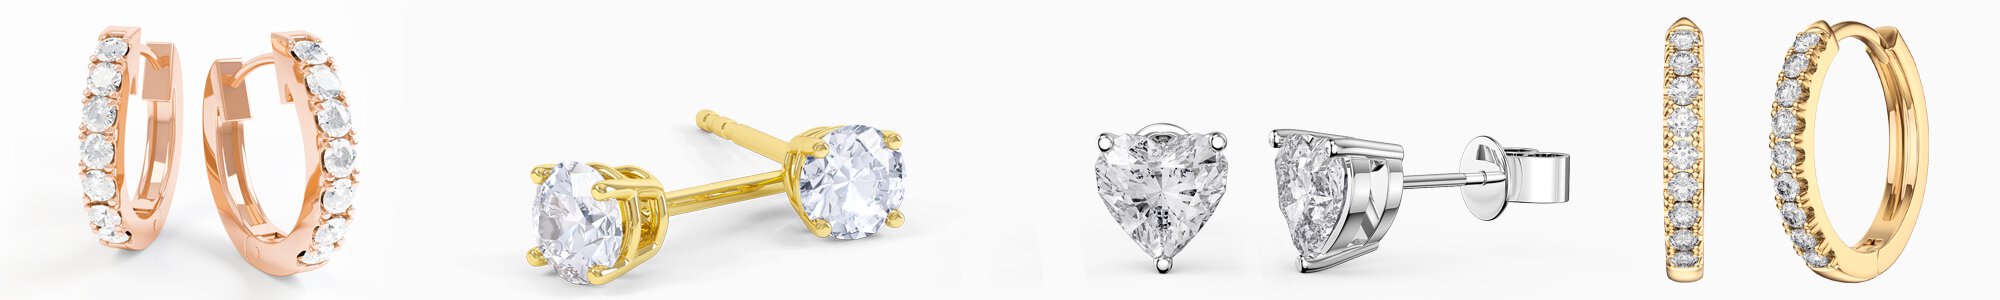 Charmisma Silver Earrings - Rich collection of jewellery with diamonds and precious gems, set in Sterling Silver or 18ct Gold